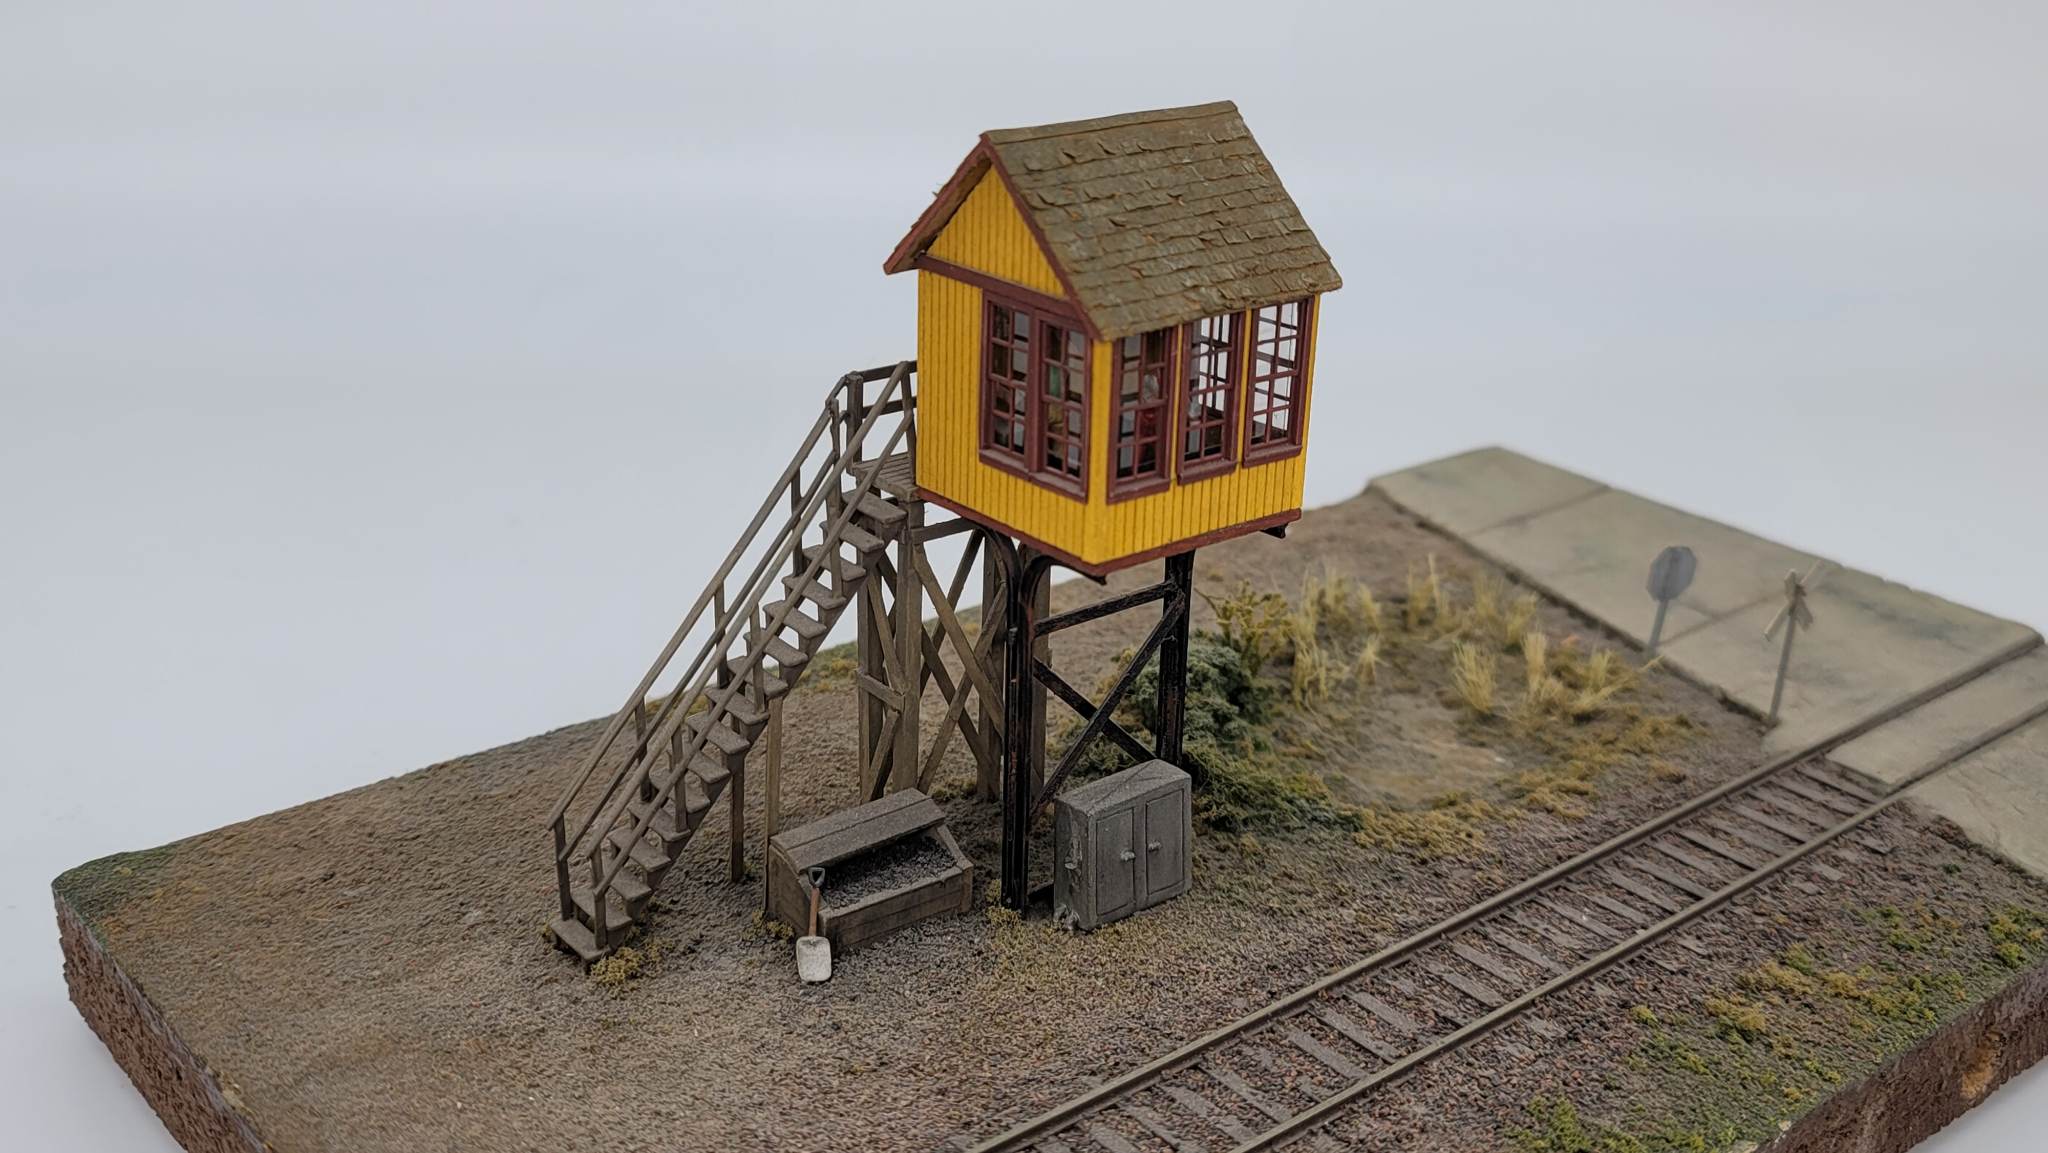 Avon St. Elevated Crossing Gate Tower (HO Scale)